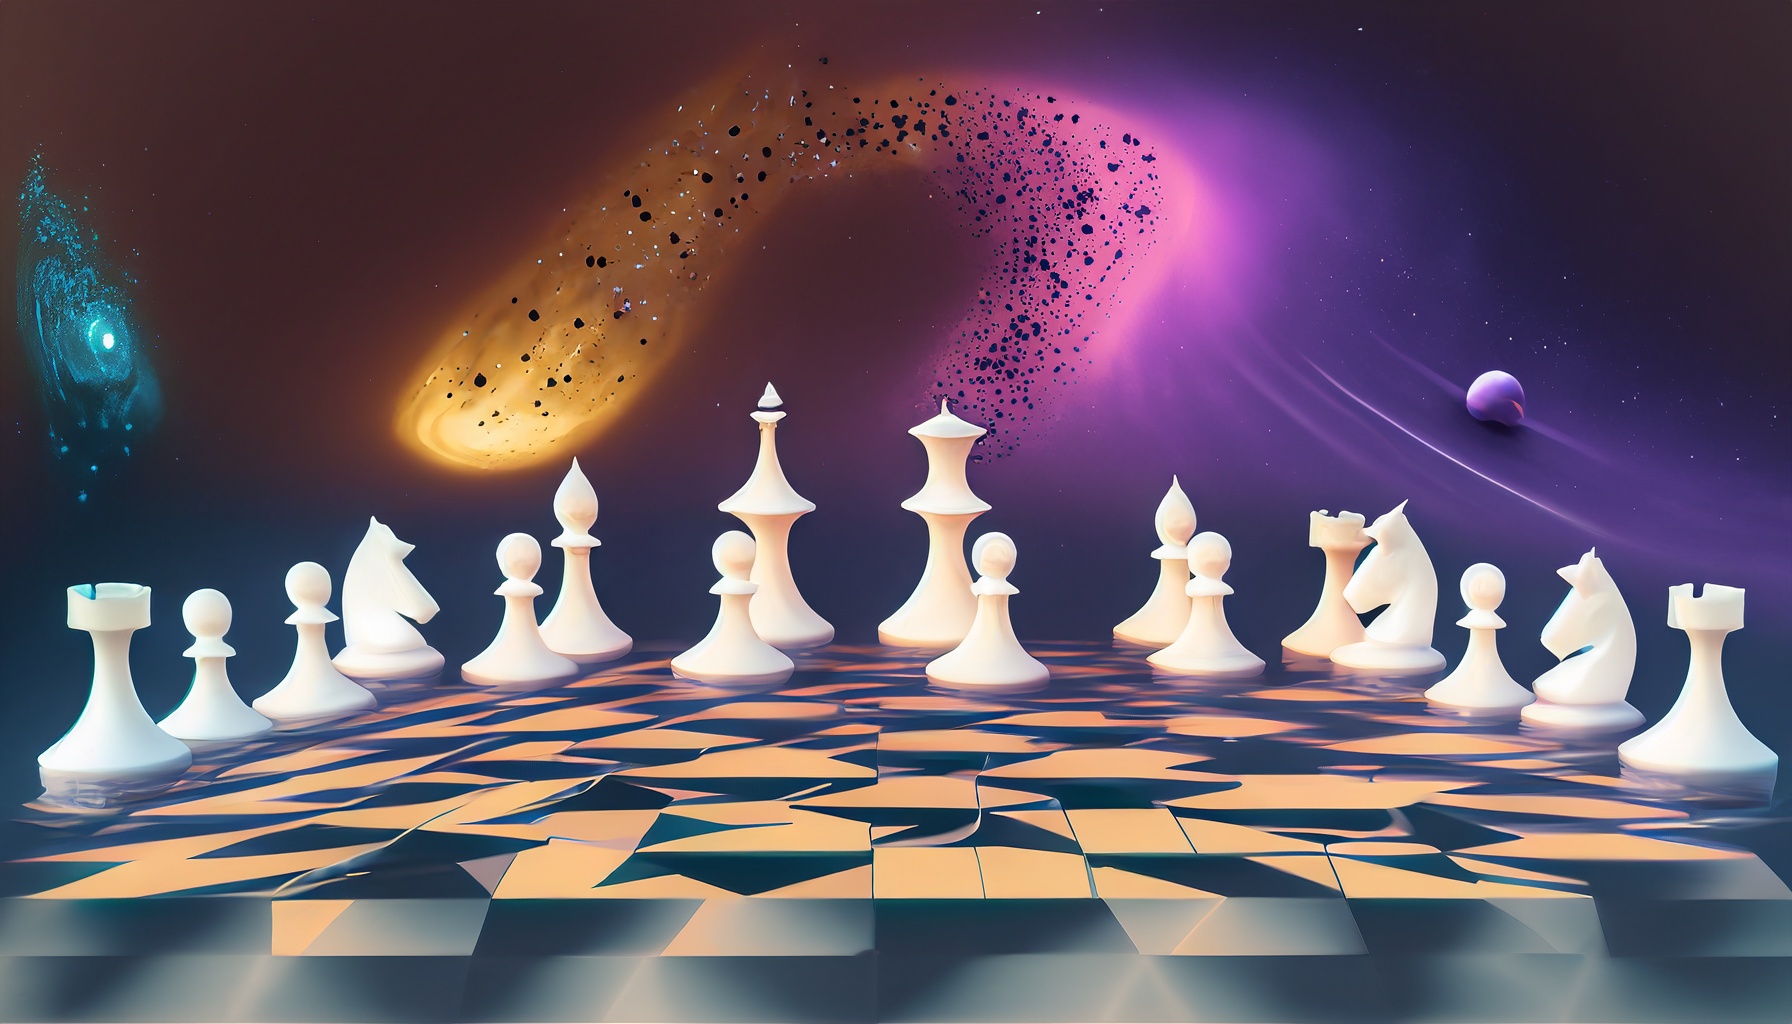 There are more possible iterations of a game of chess than there are atoms in the observable universe